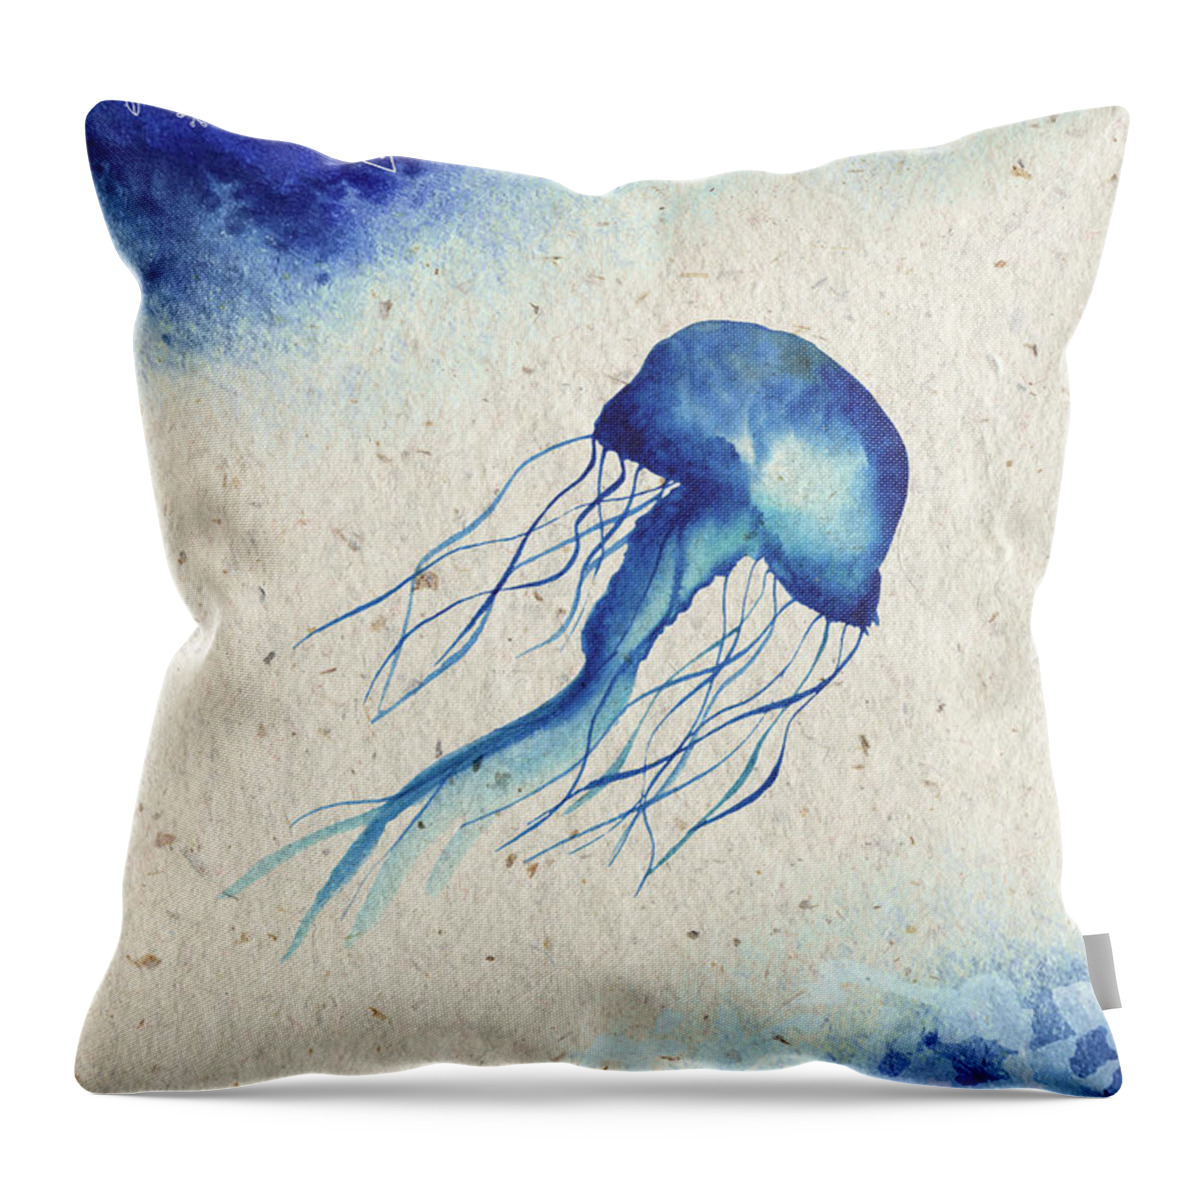 Blue Jellyfish Throw Pillow featuring the painting Blue Jellyfish by Garden Of Delights